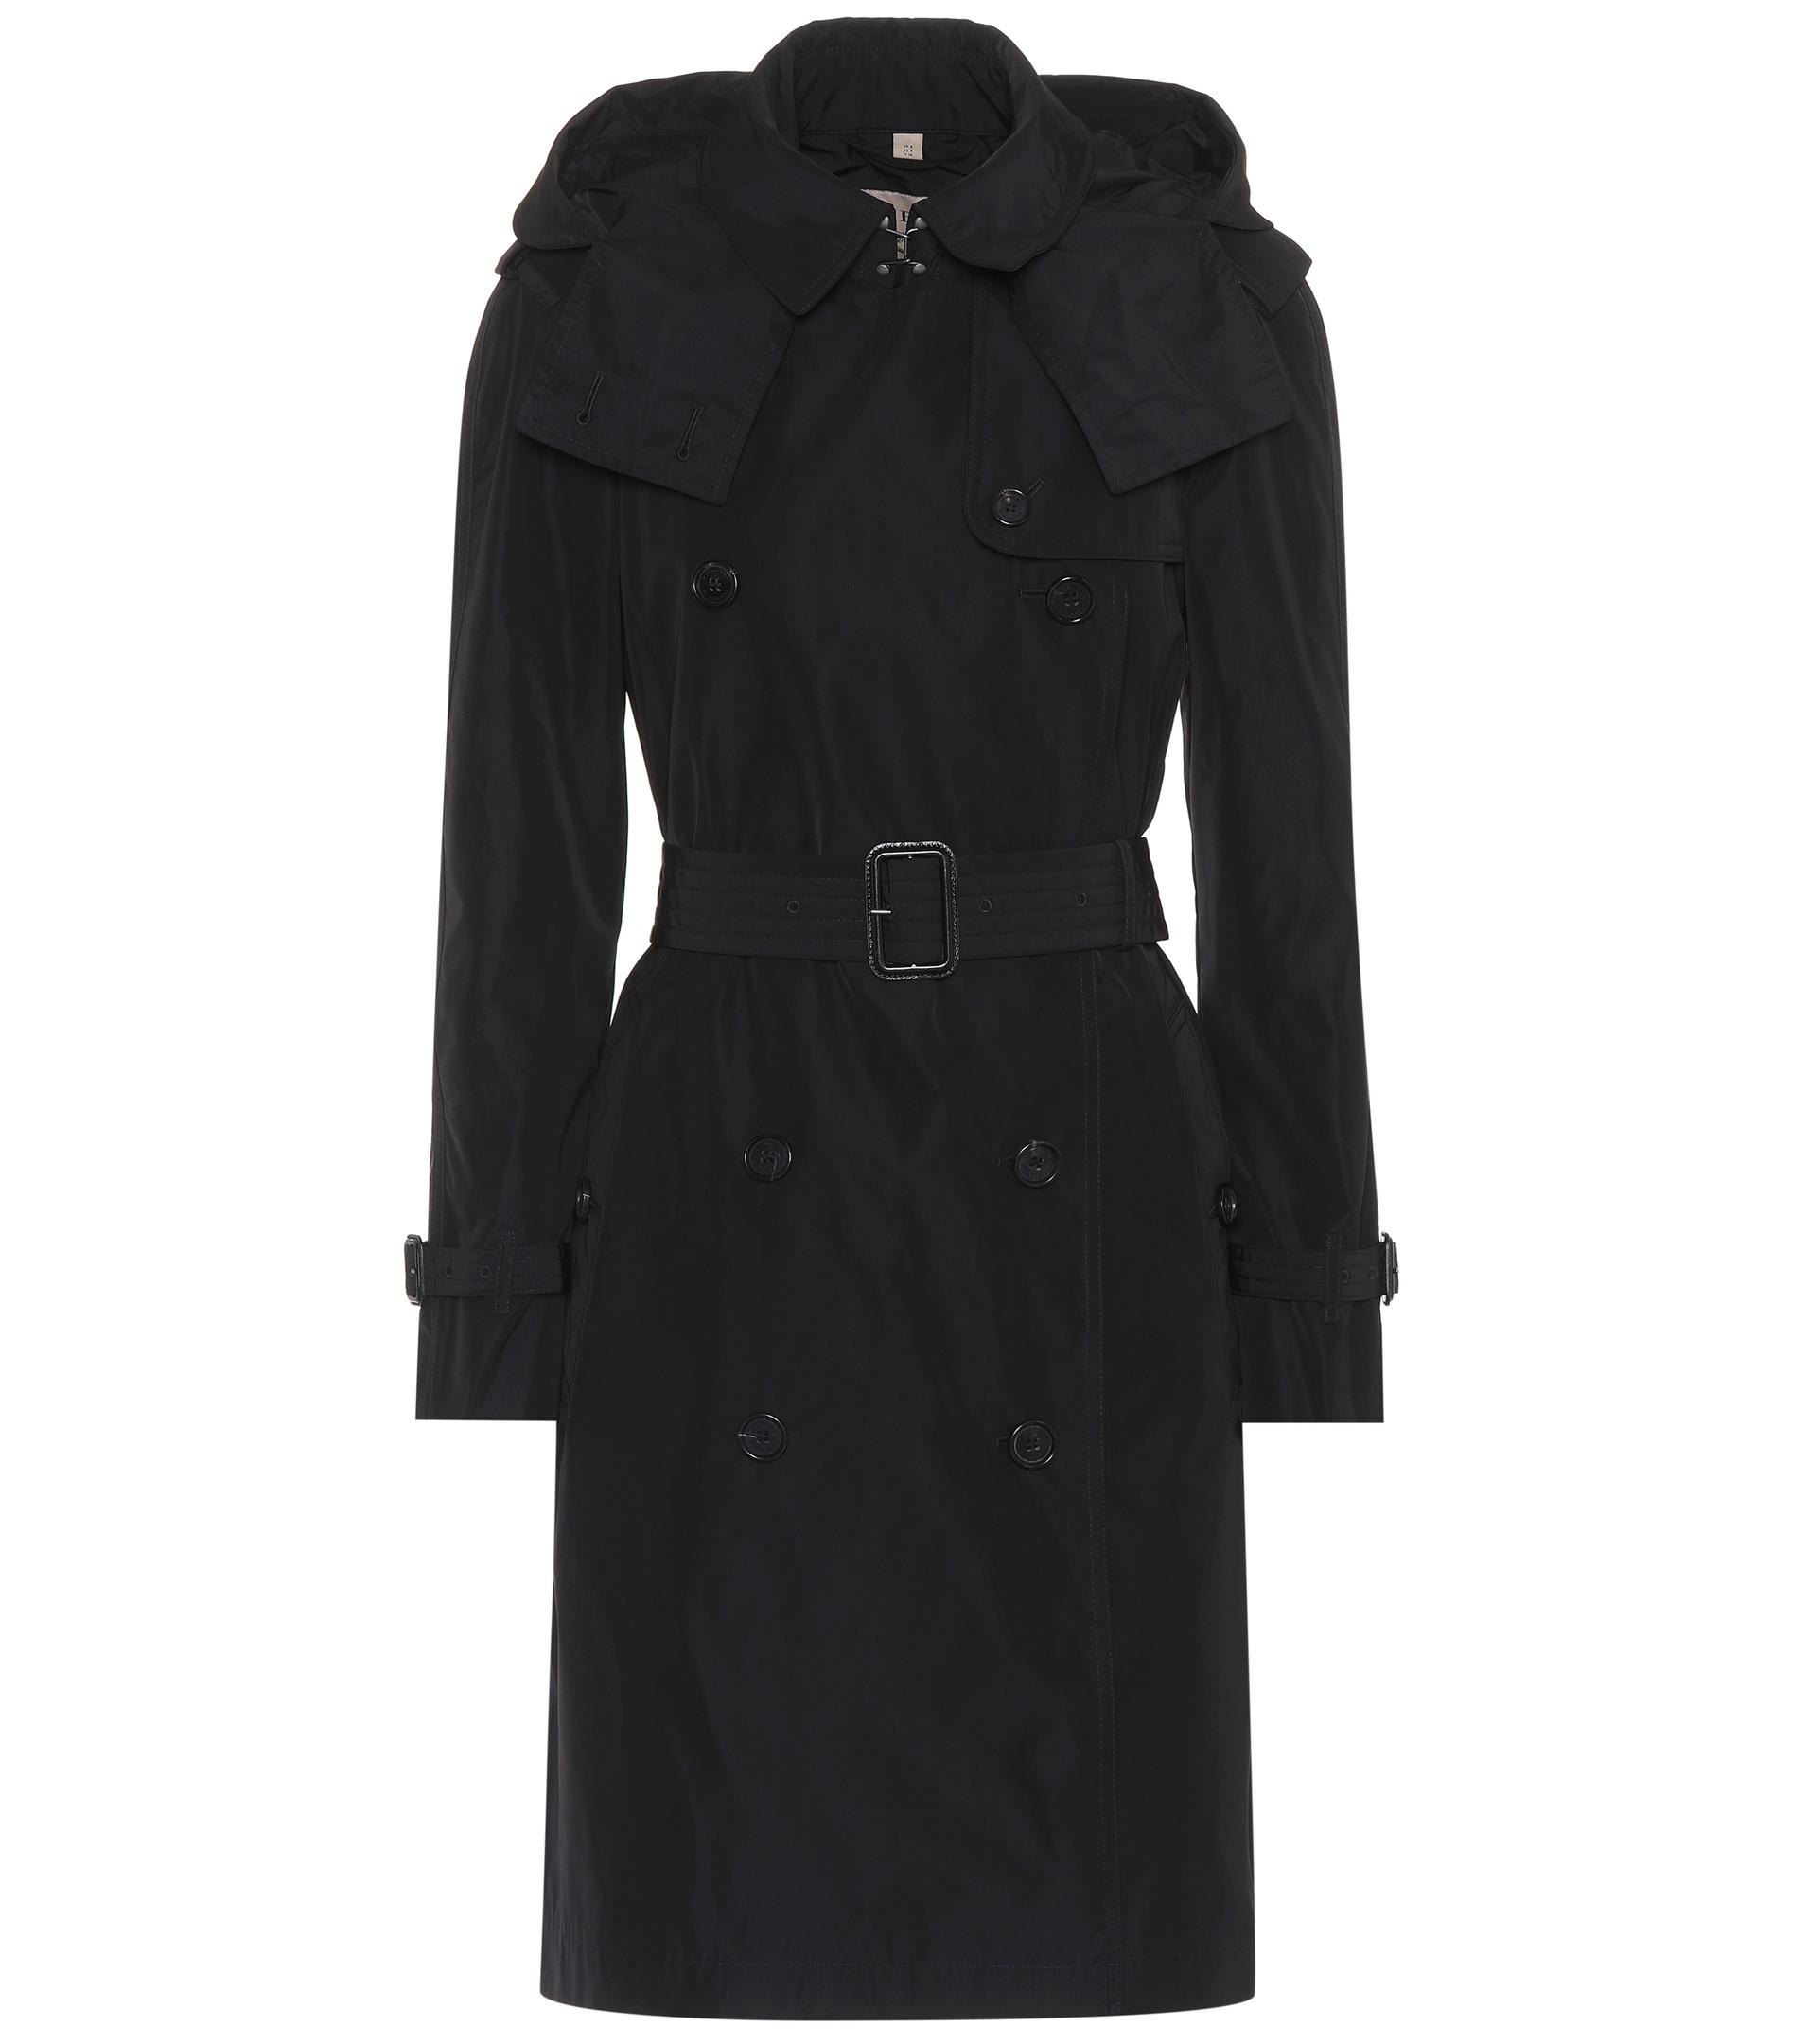 Lyst - Burberry Technical Fabric Trench Coat in Black